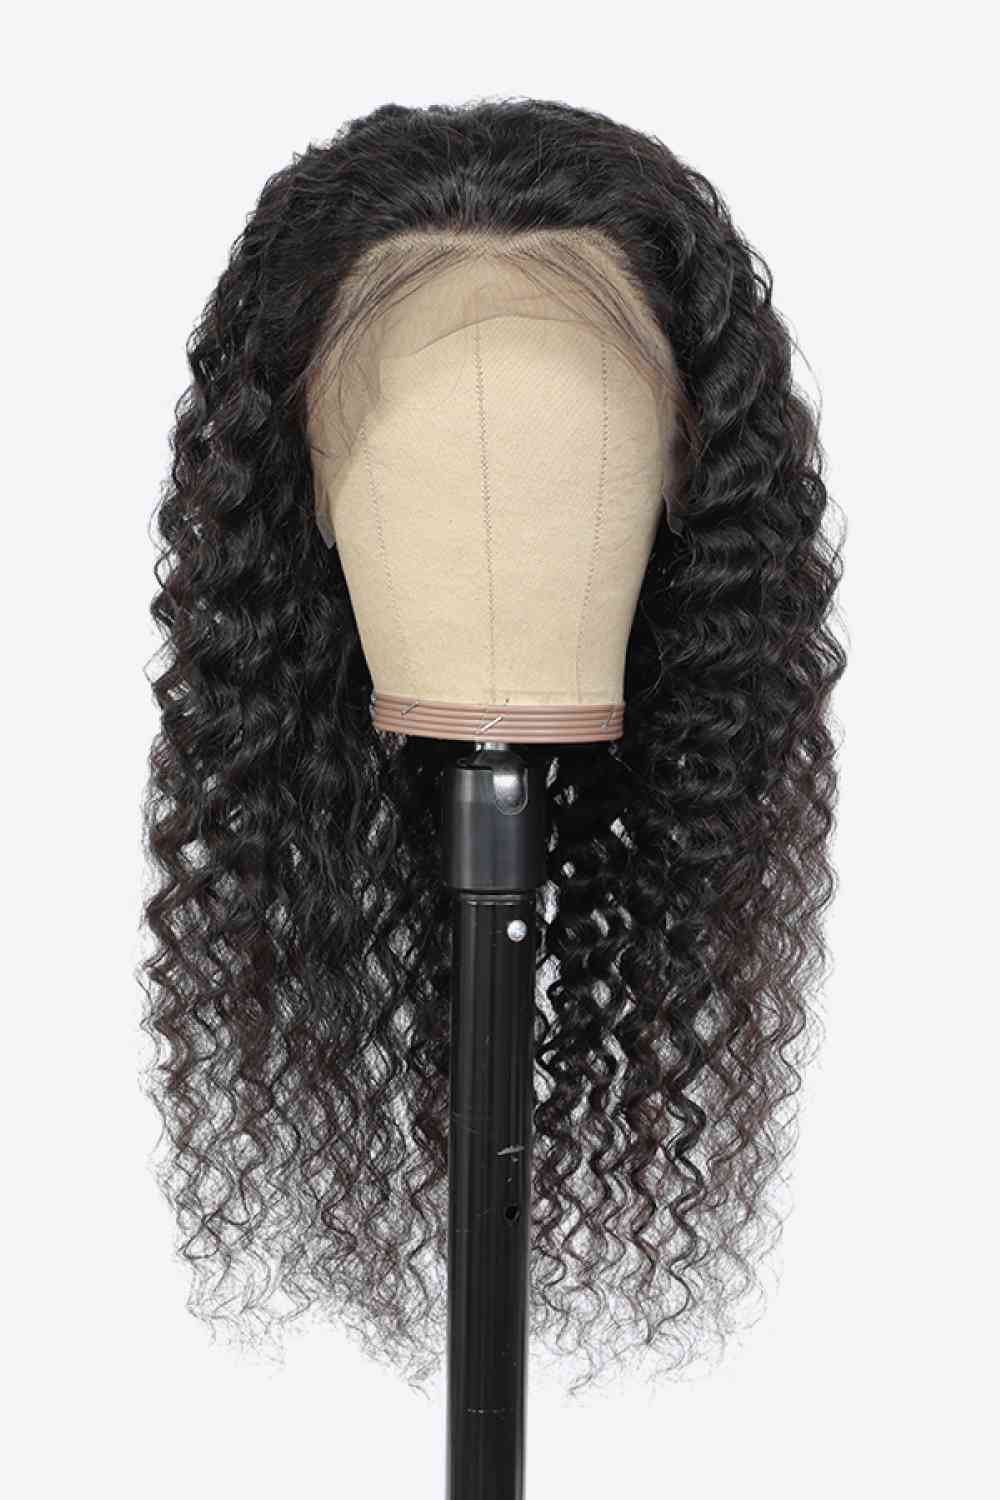 20” 13x4“ Lace Front Wigs Human Hair Curly Natural Color 150% Density - lolaluxeshop